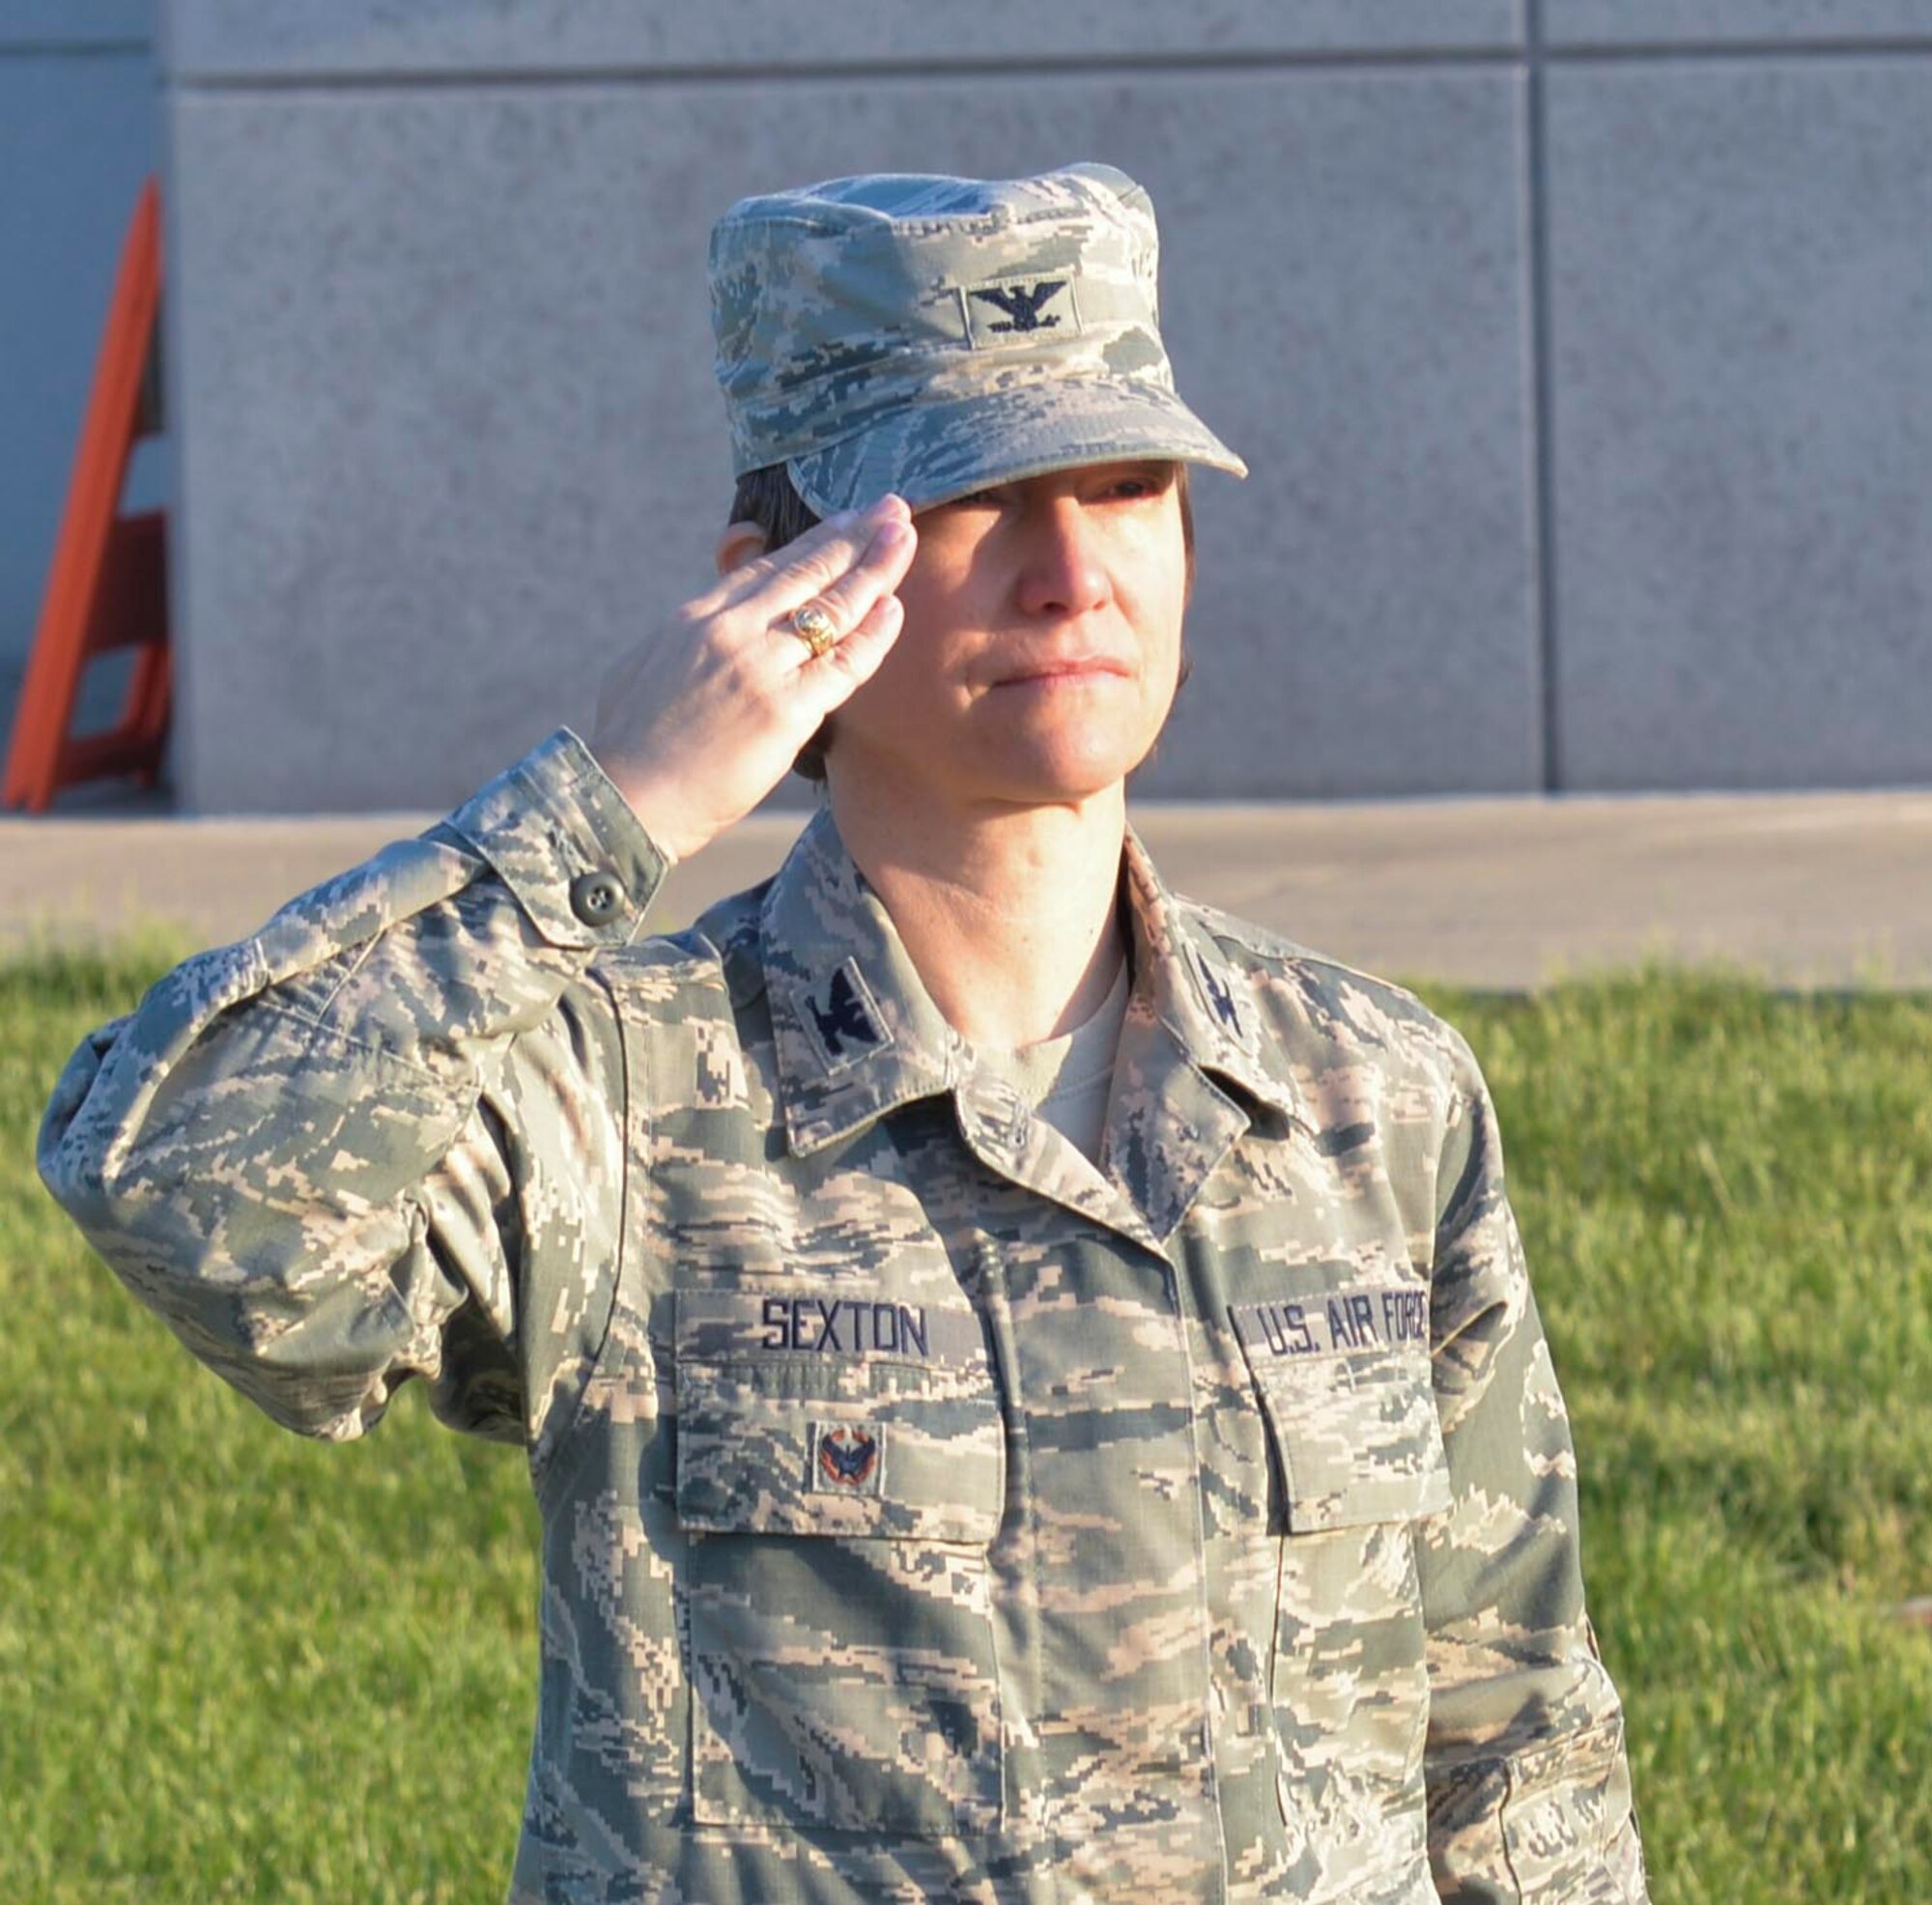 Wright-Patterson AFB, Ohio -- Col. Trish Sexton, NASIC vice commander, salutes a U.S. flag during reveille here May 15. Sexton has carried the same U.S. flag from assignment to assignment throughout her career.  "It was given to me by the Airmen from my second assignment and had been flown over the headquarters of my first assignment " said Sexton. "It has been everywhere with me." The flag will be used in Sexton's retirement ceremony July 13.